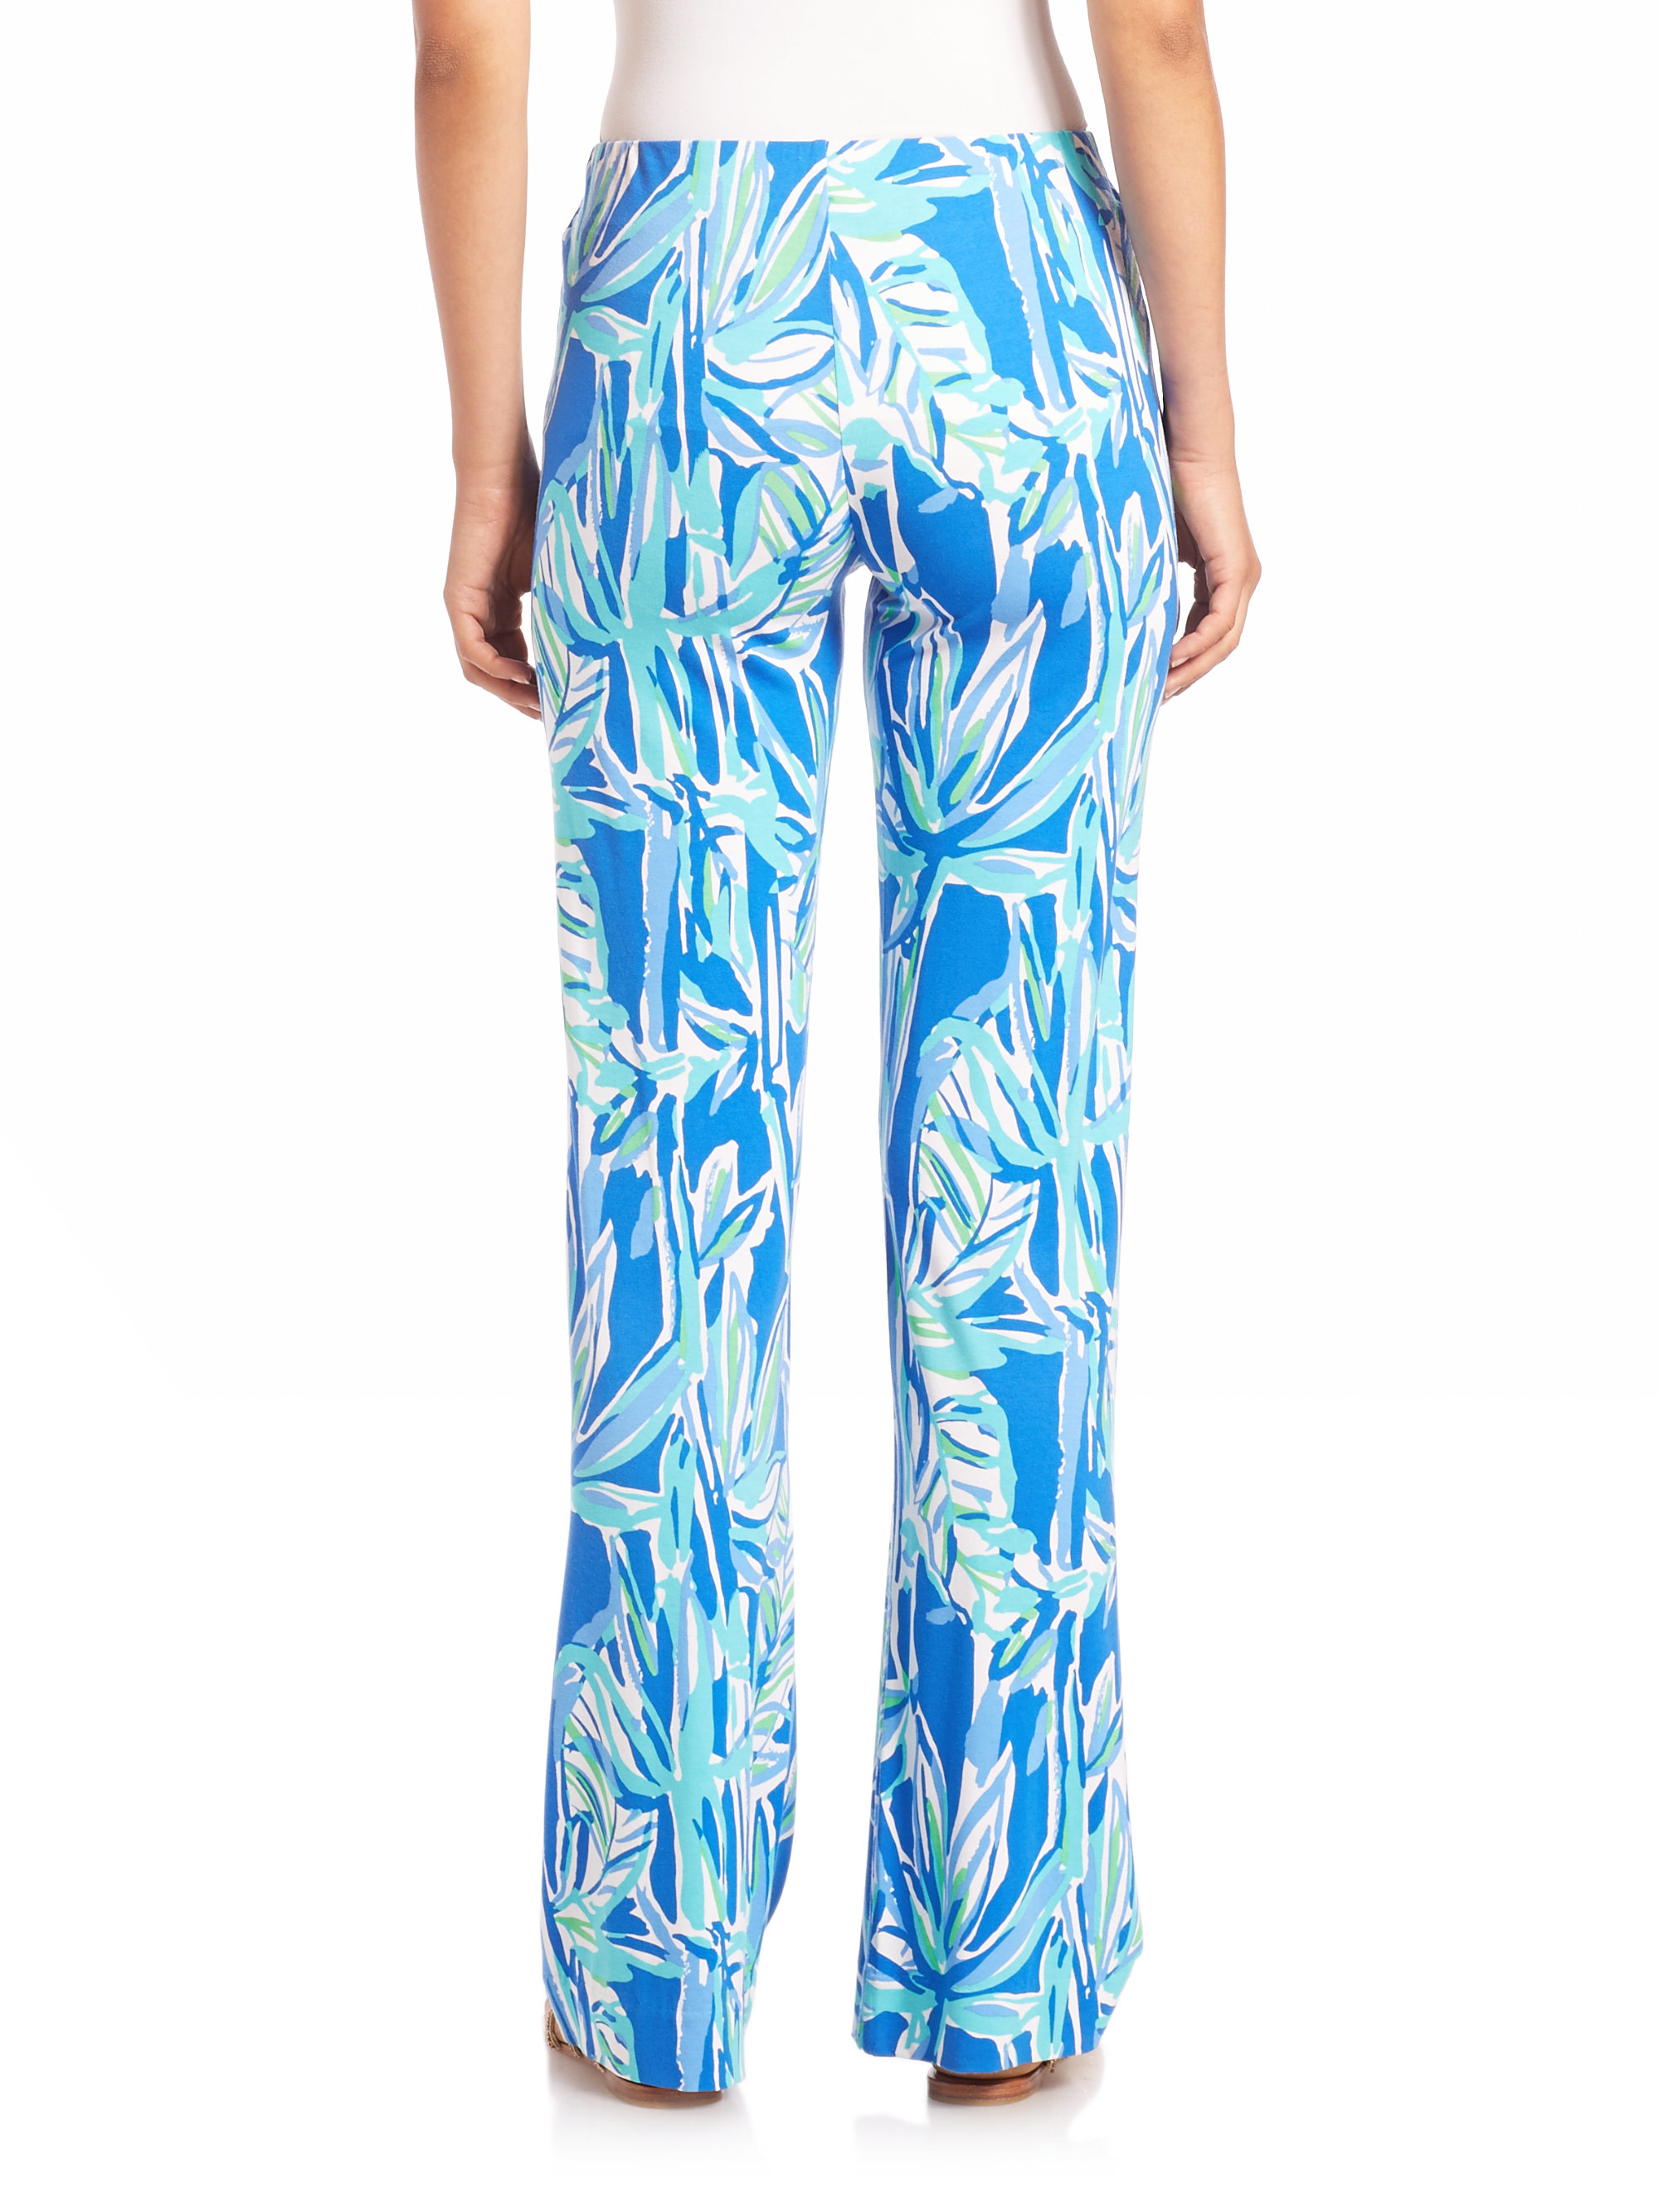 Lyst - Lilly Pulitzer Georgia May Palazzo Pants in Blue